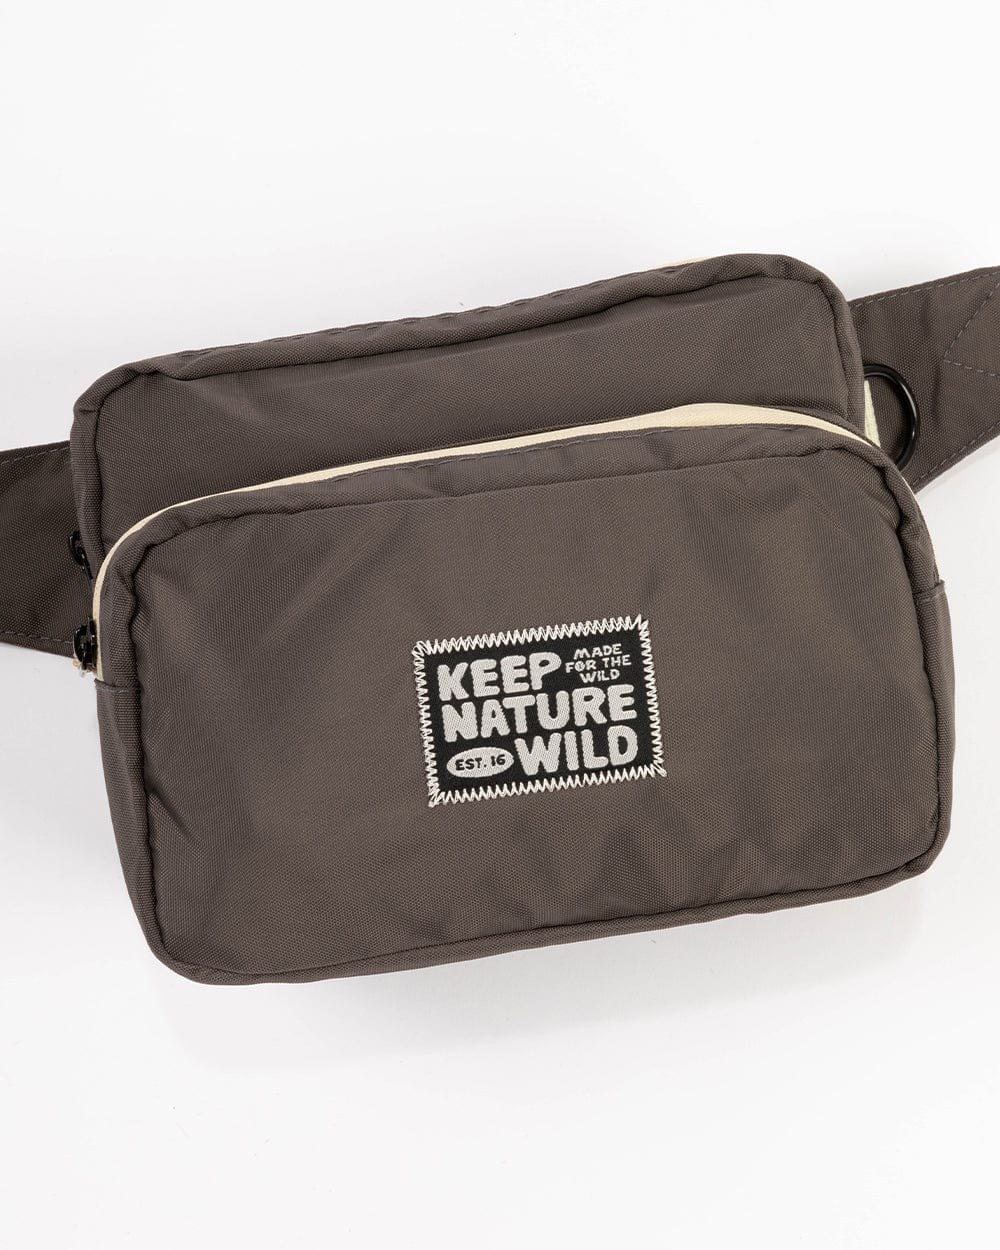 Keep Nature Wild Fanny Packs Fanny Pack + Stickers Bundle | Coal/Cream